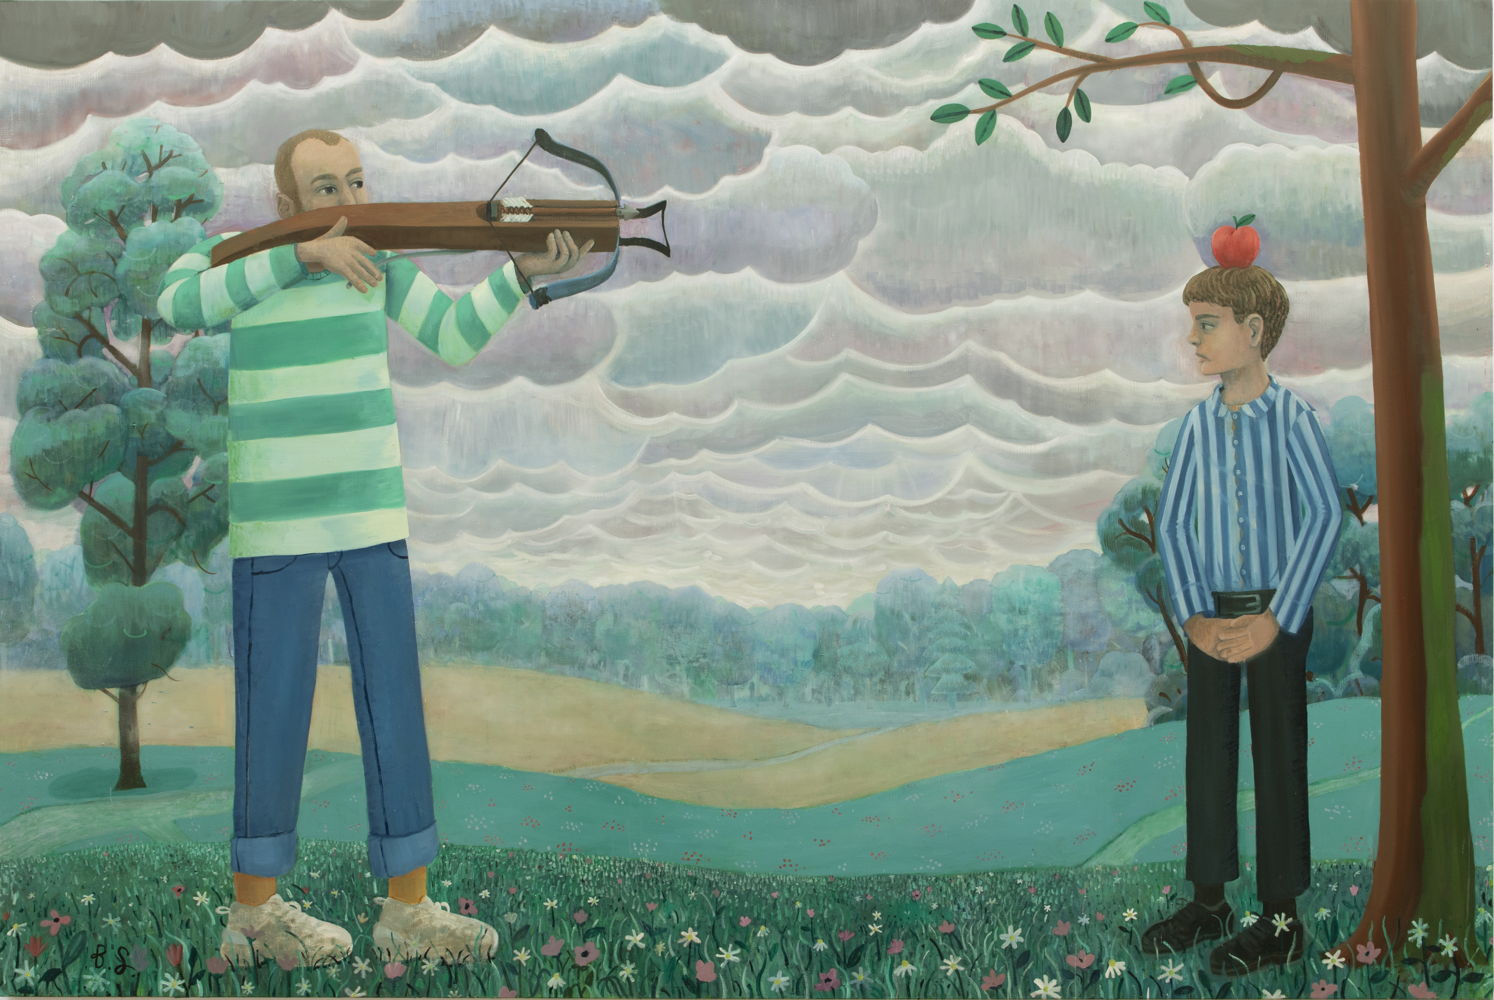 BEN SLEDSENS, Shooting apples , 2019. Oil and acrylic on canvas 200 x 300 cm